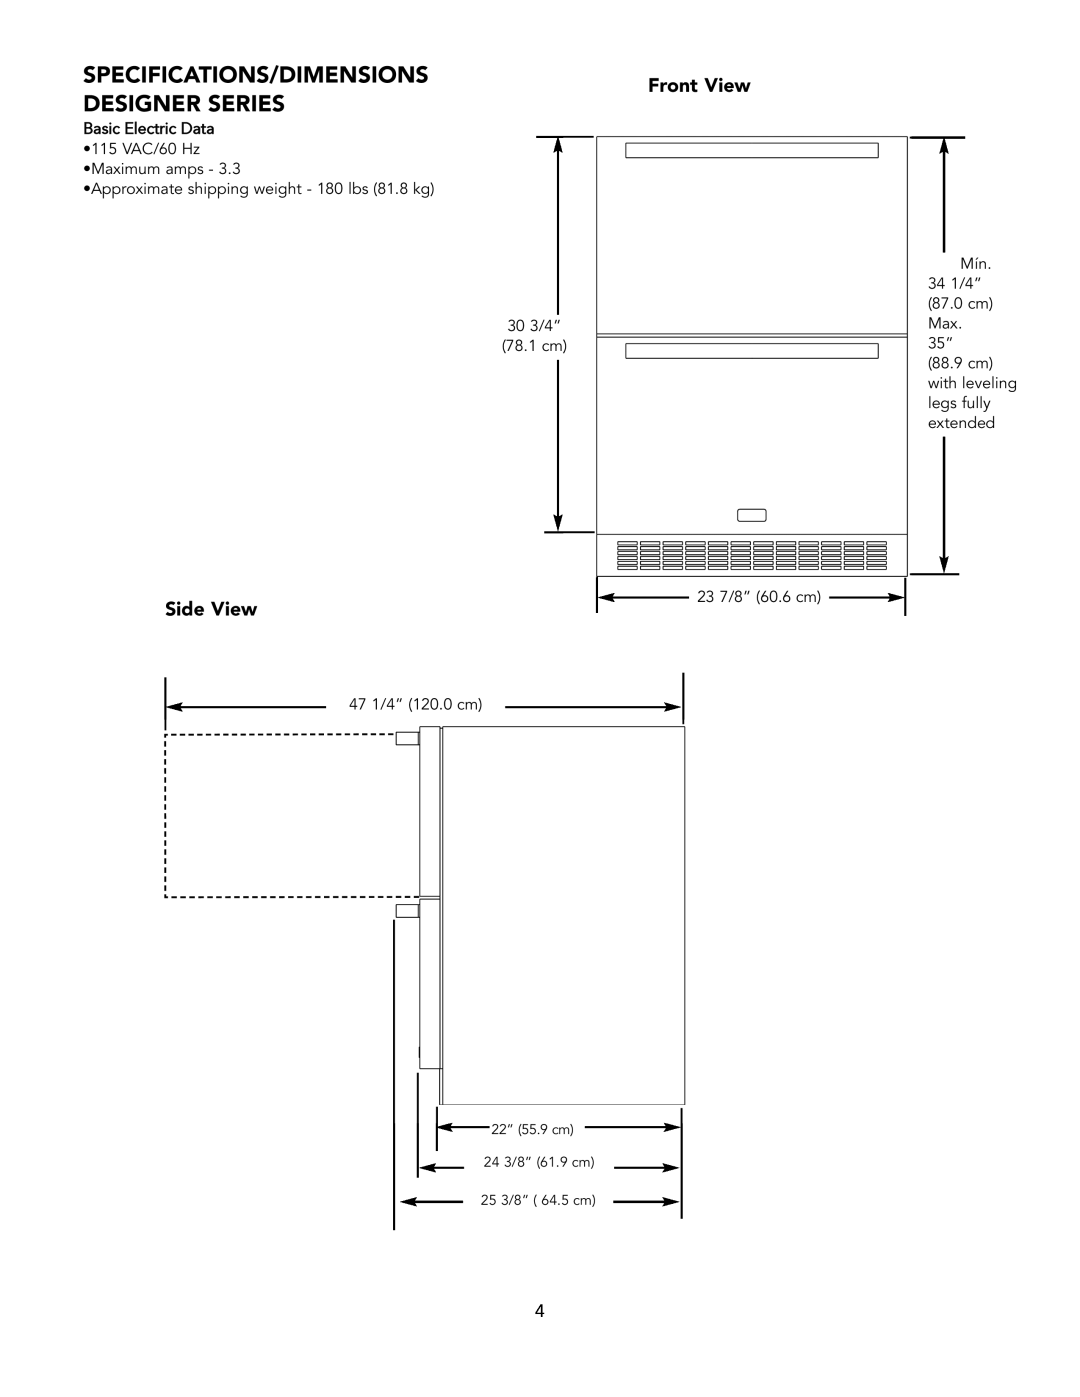 Viking Refrigerator Drawer manual Specifications/Dimensions Designer Series, Front View, Side View, 30 3/4” 78.1 cm 